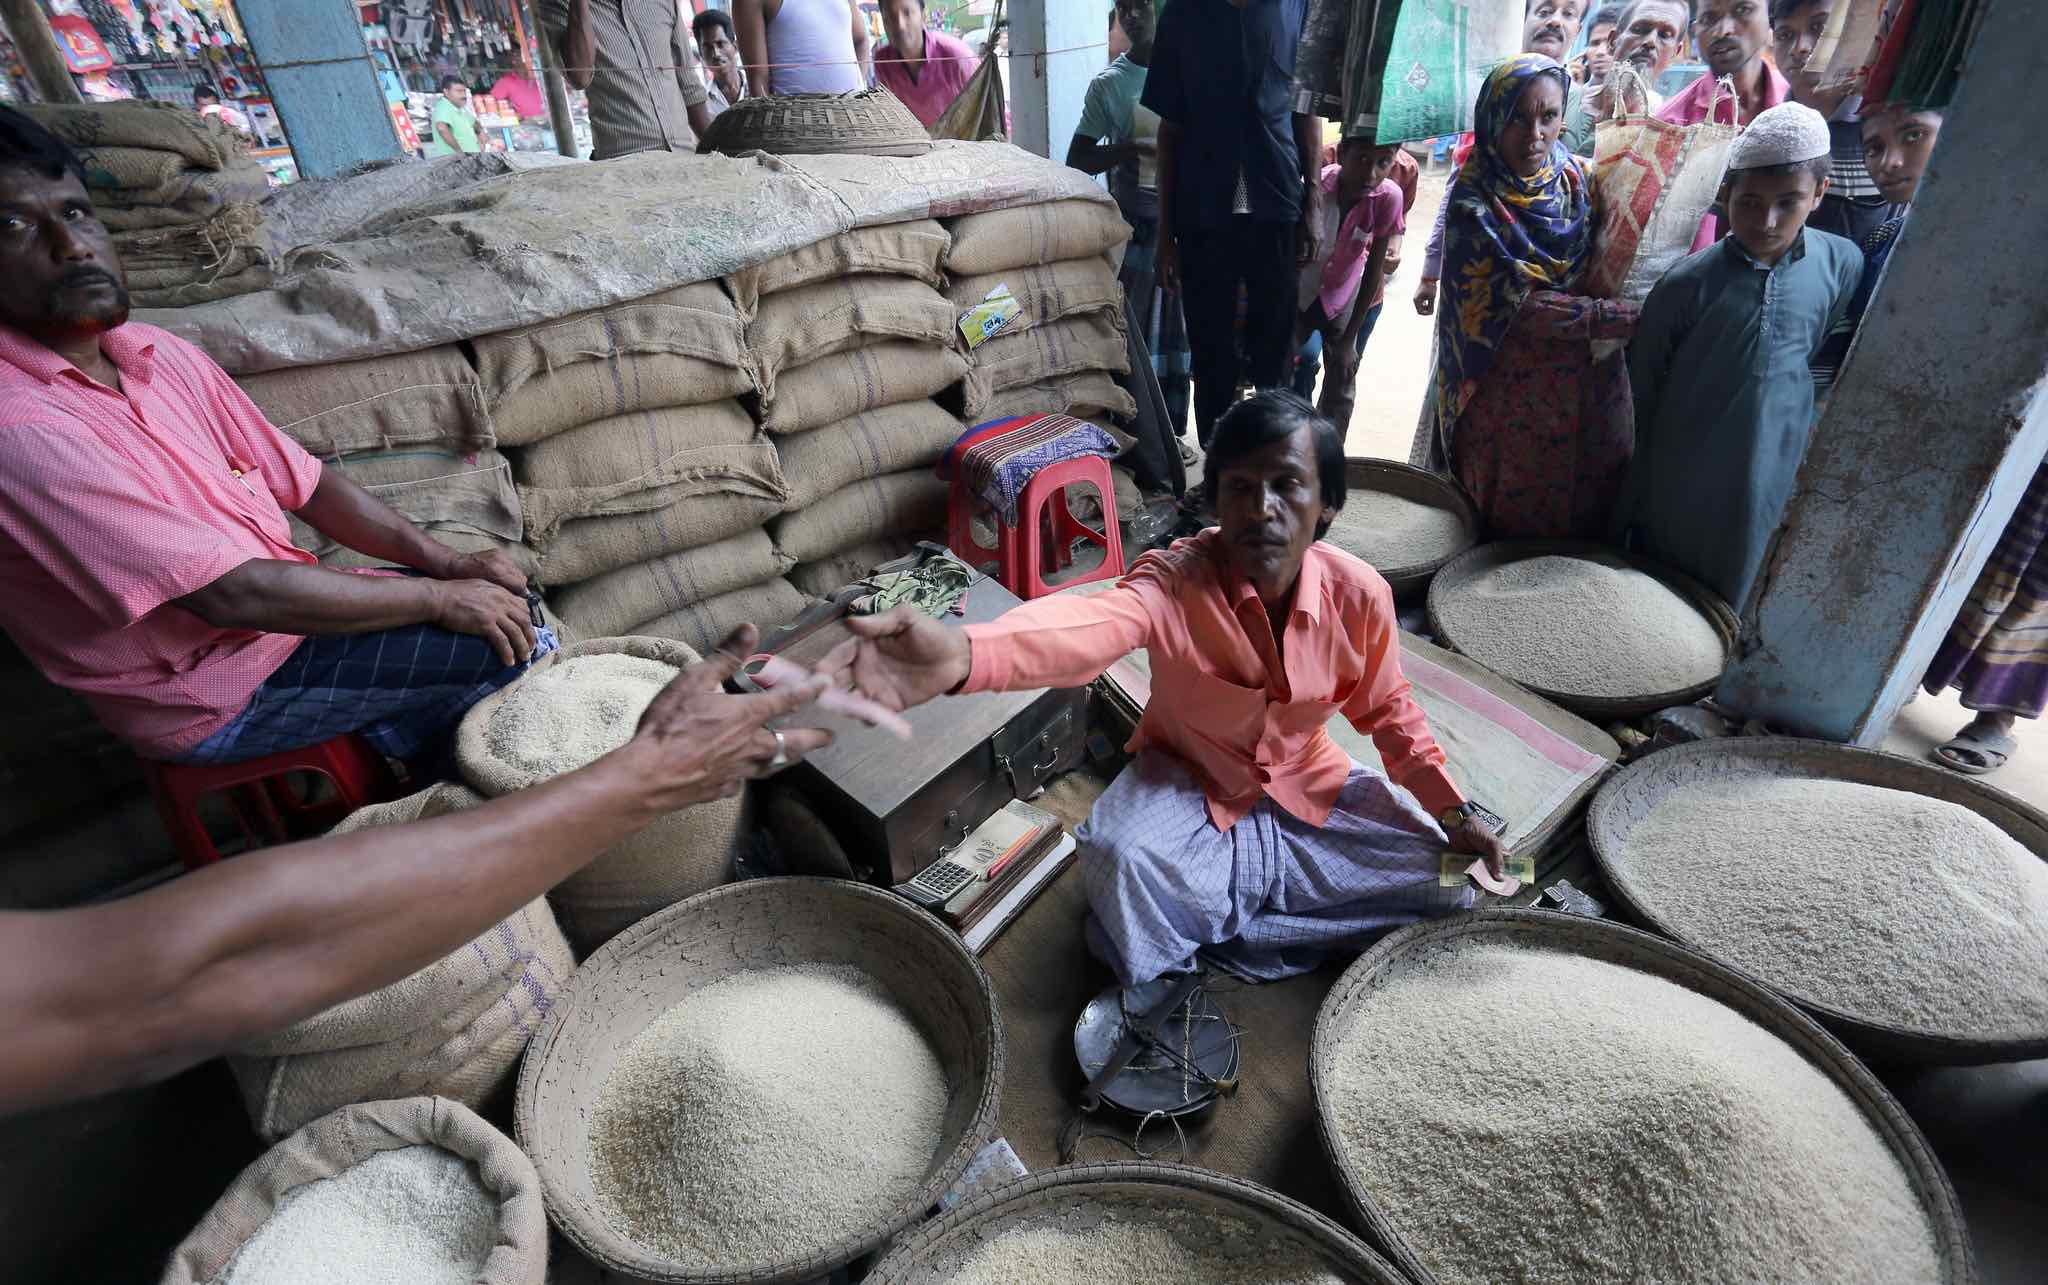 Rice vendor seated, surrounded by containers of rice, handing money to an outstretched hand